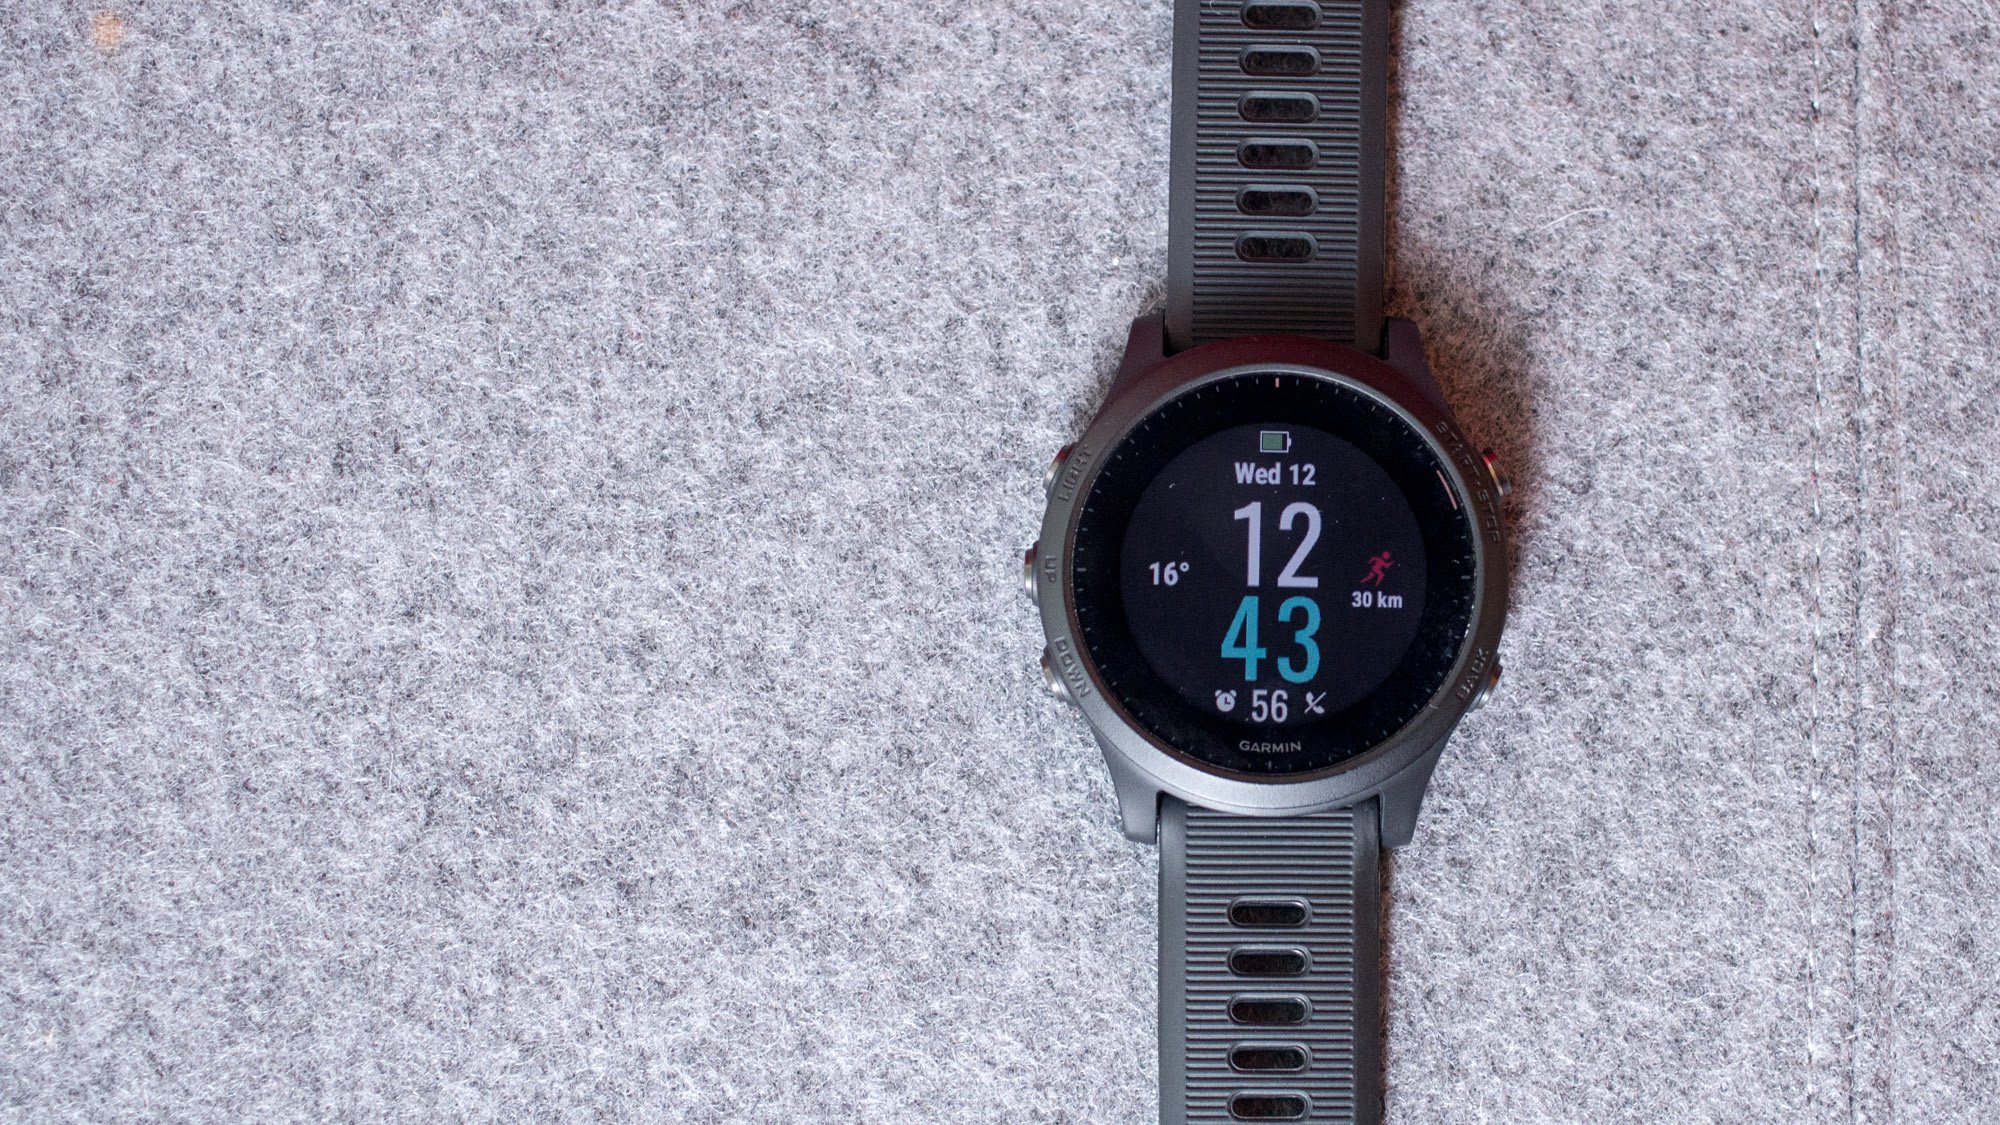 The Garmin Forerunner 945 Is Now The Cheapest We've Ever Seen It